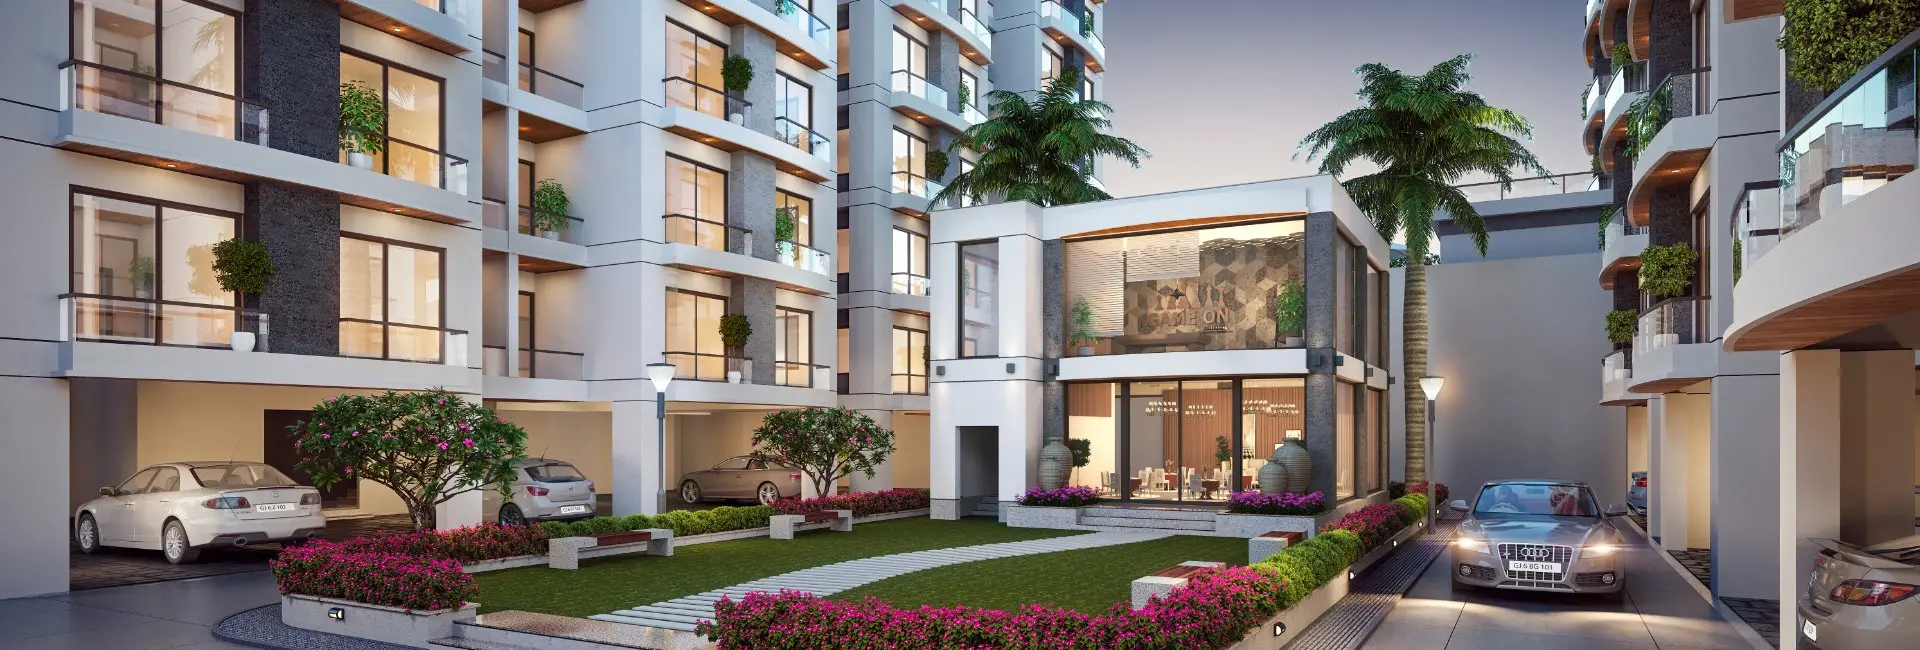 Flats, penthouse and shops in Vadodara - Shree Siddheshwar Heliconia